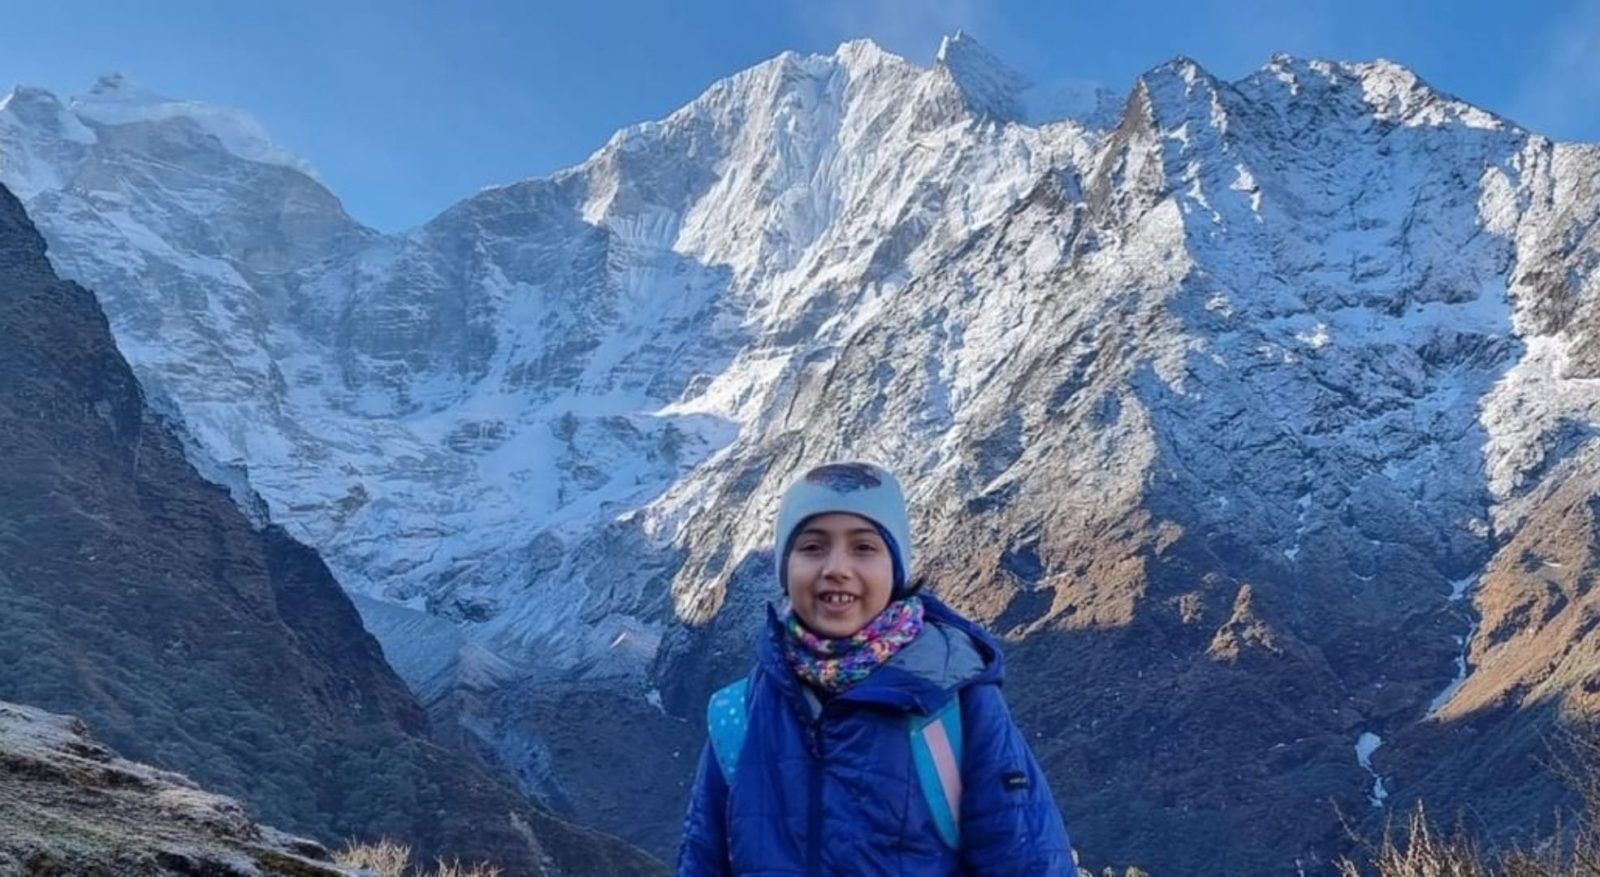 Who is Rhythm Mamania? Get to know the 10-year old Indian who conquered Mount Everest Base Camp